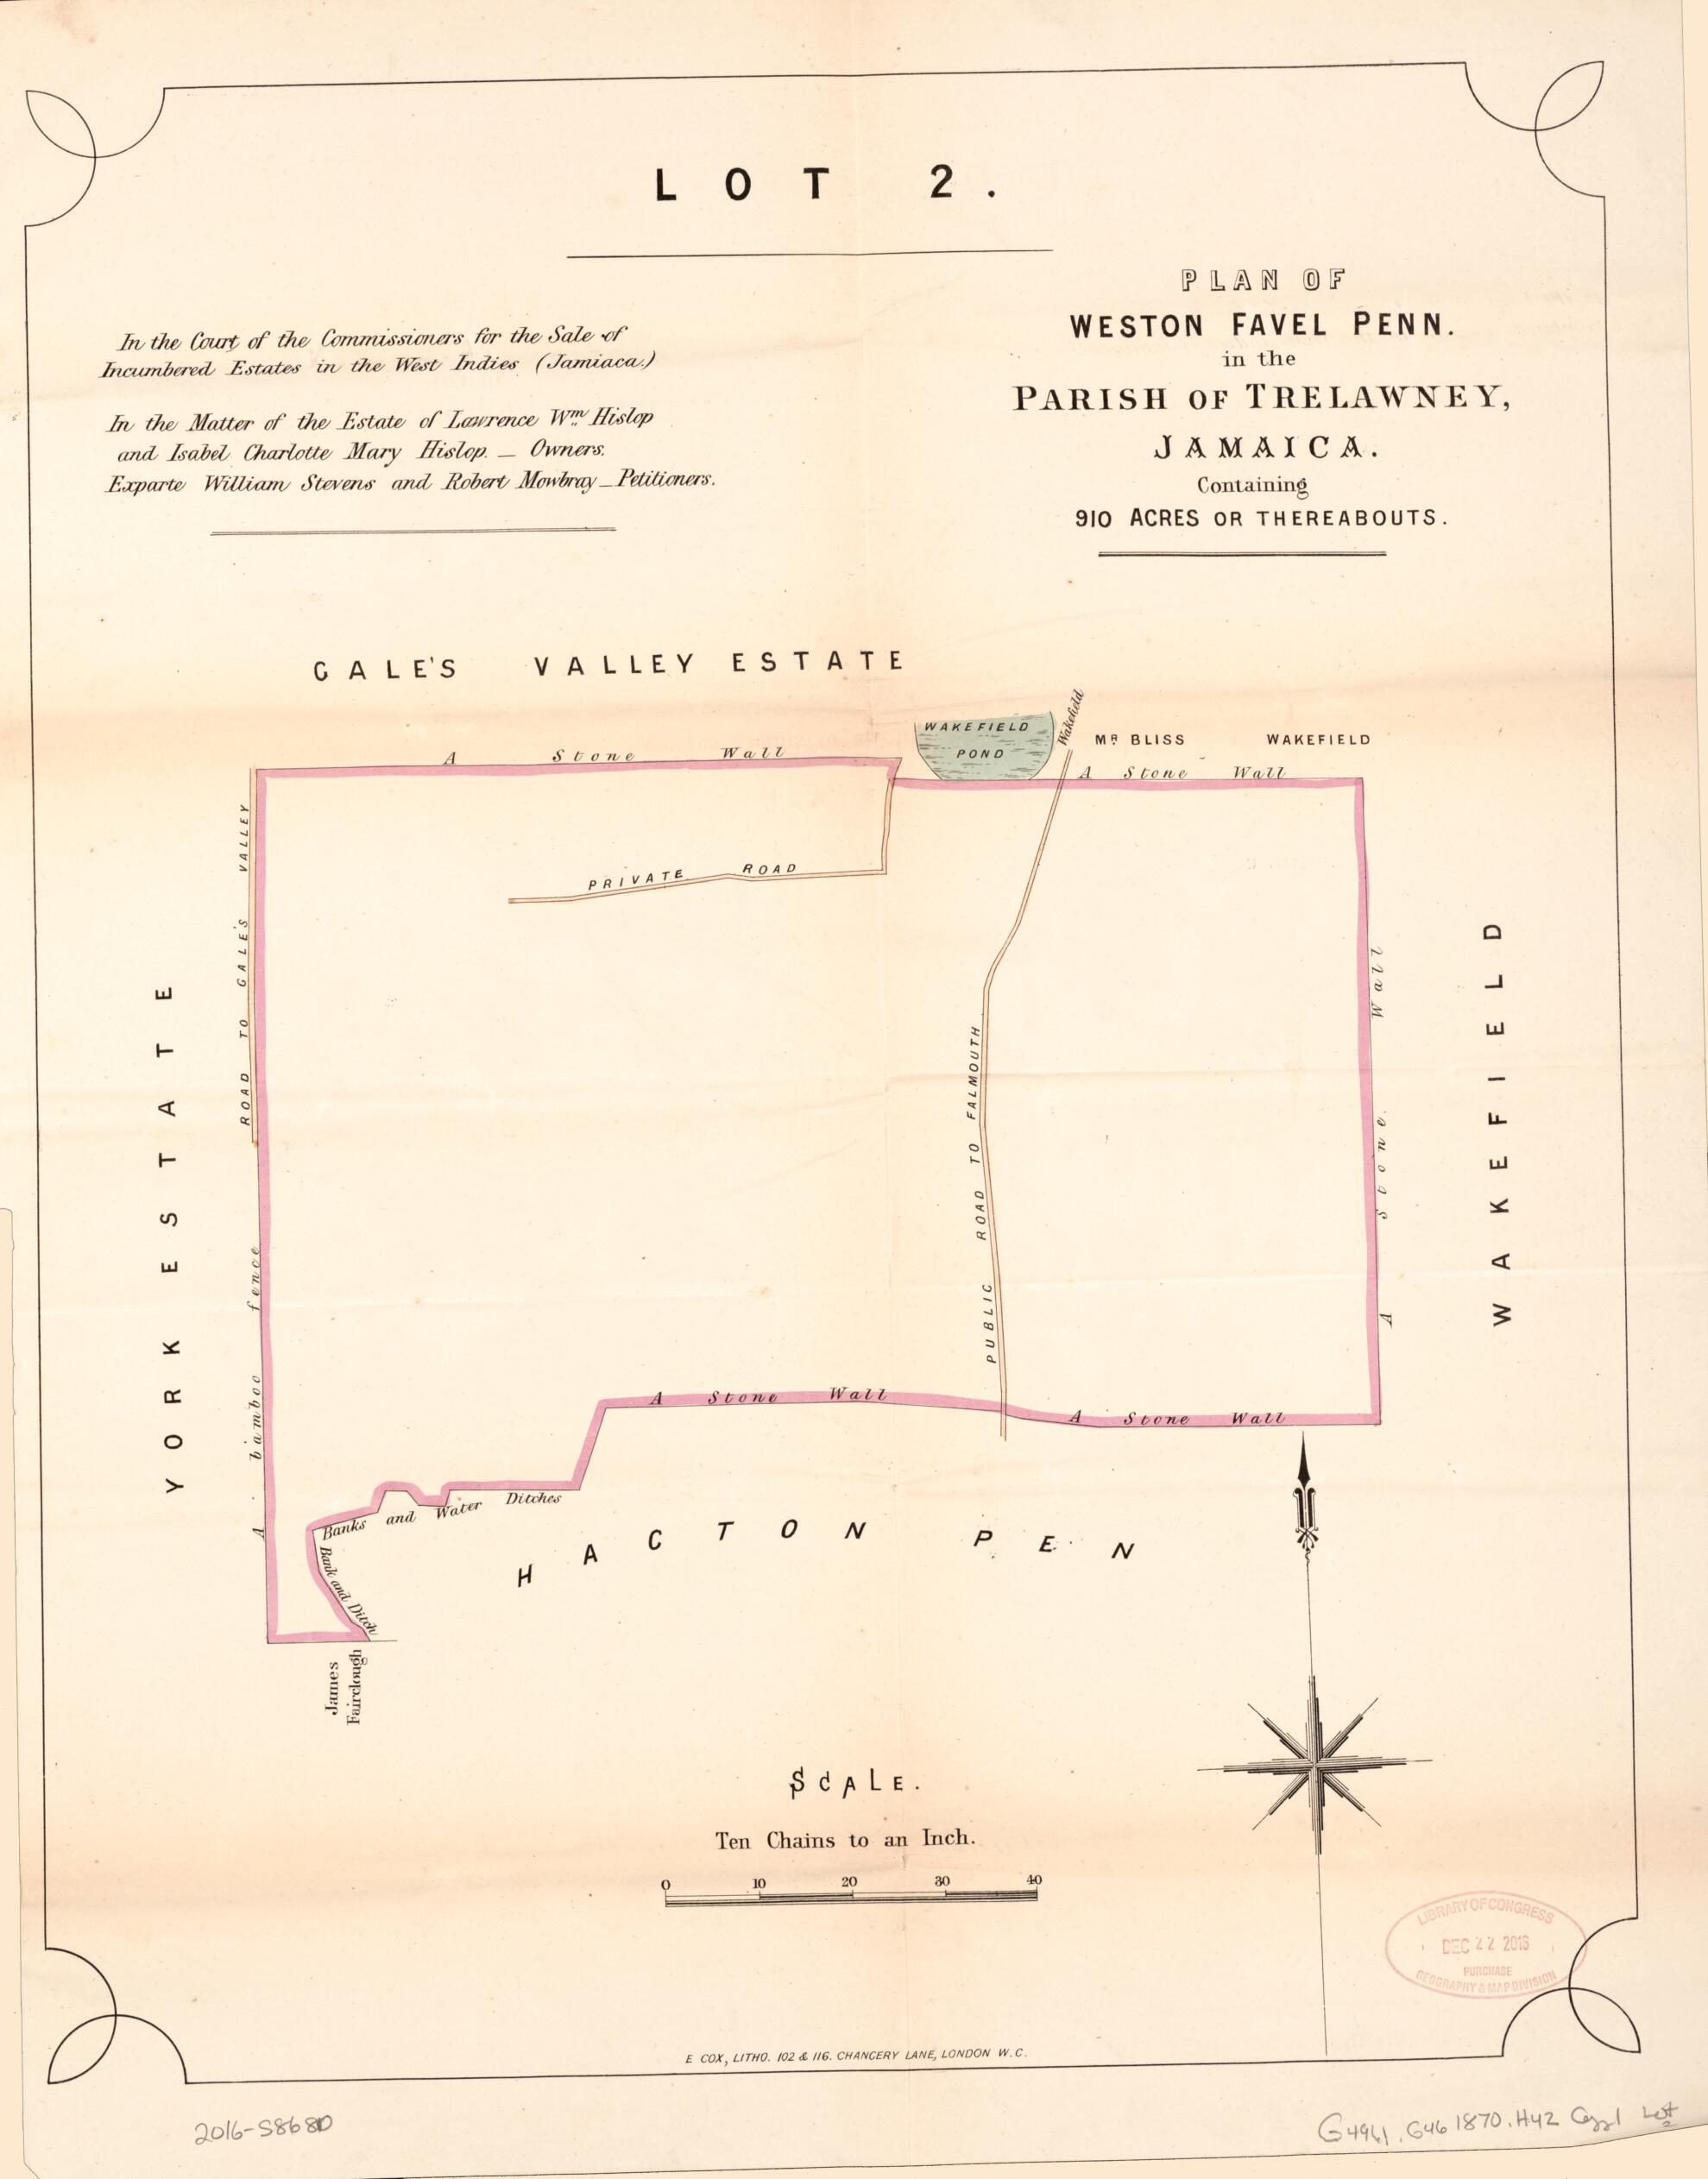 This old map of Lot 2. Plan of Weston Favel Penn. from Encumbered Estates In the West Indies (Jamaica) from 1870 was created by Vaughan &amp; Leifchild (Firm) Hards in 1870